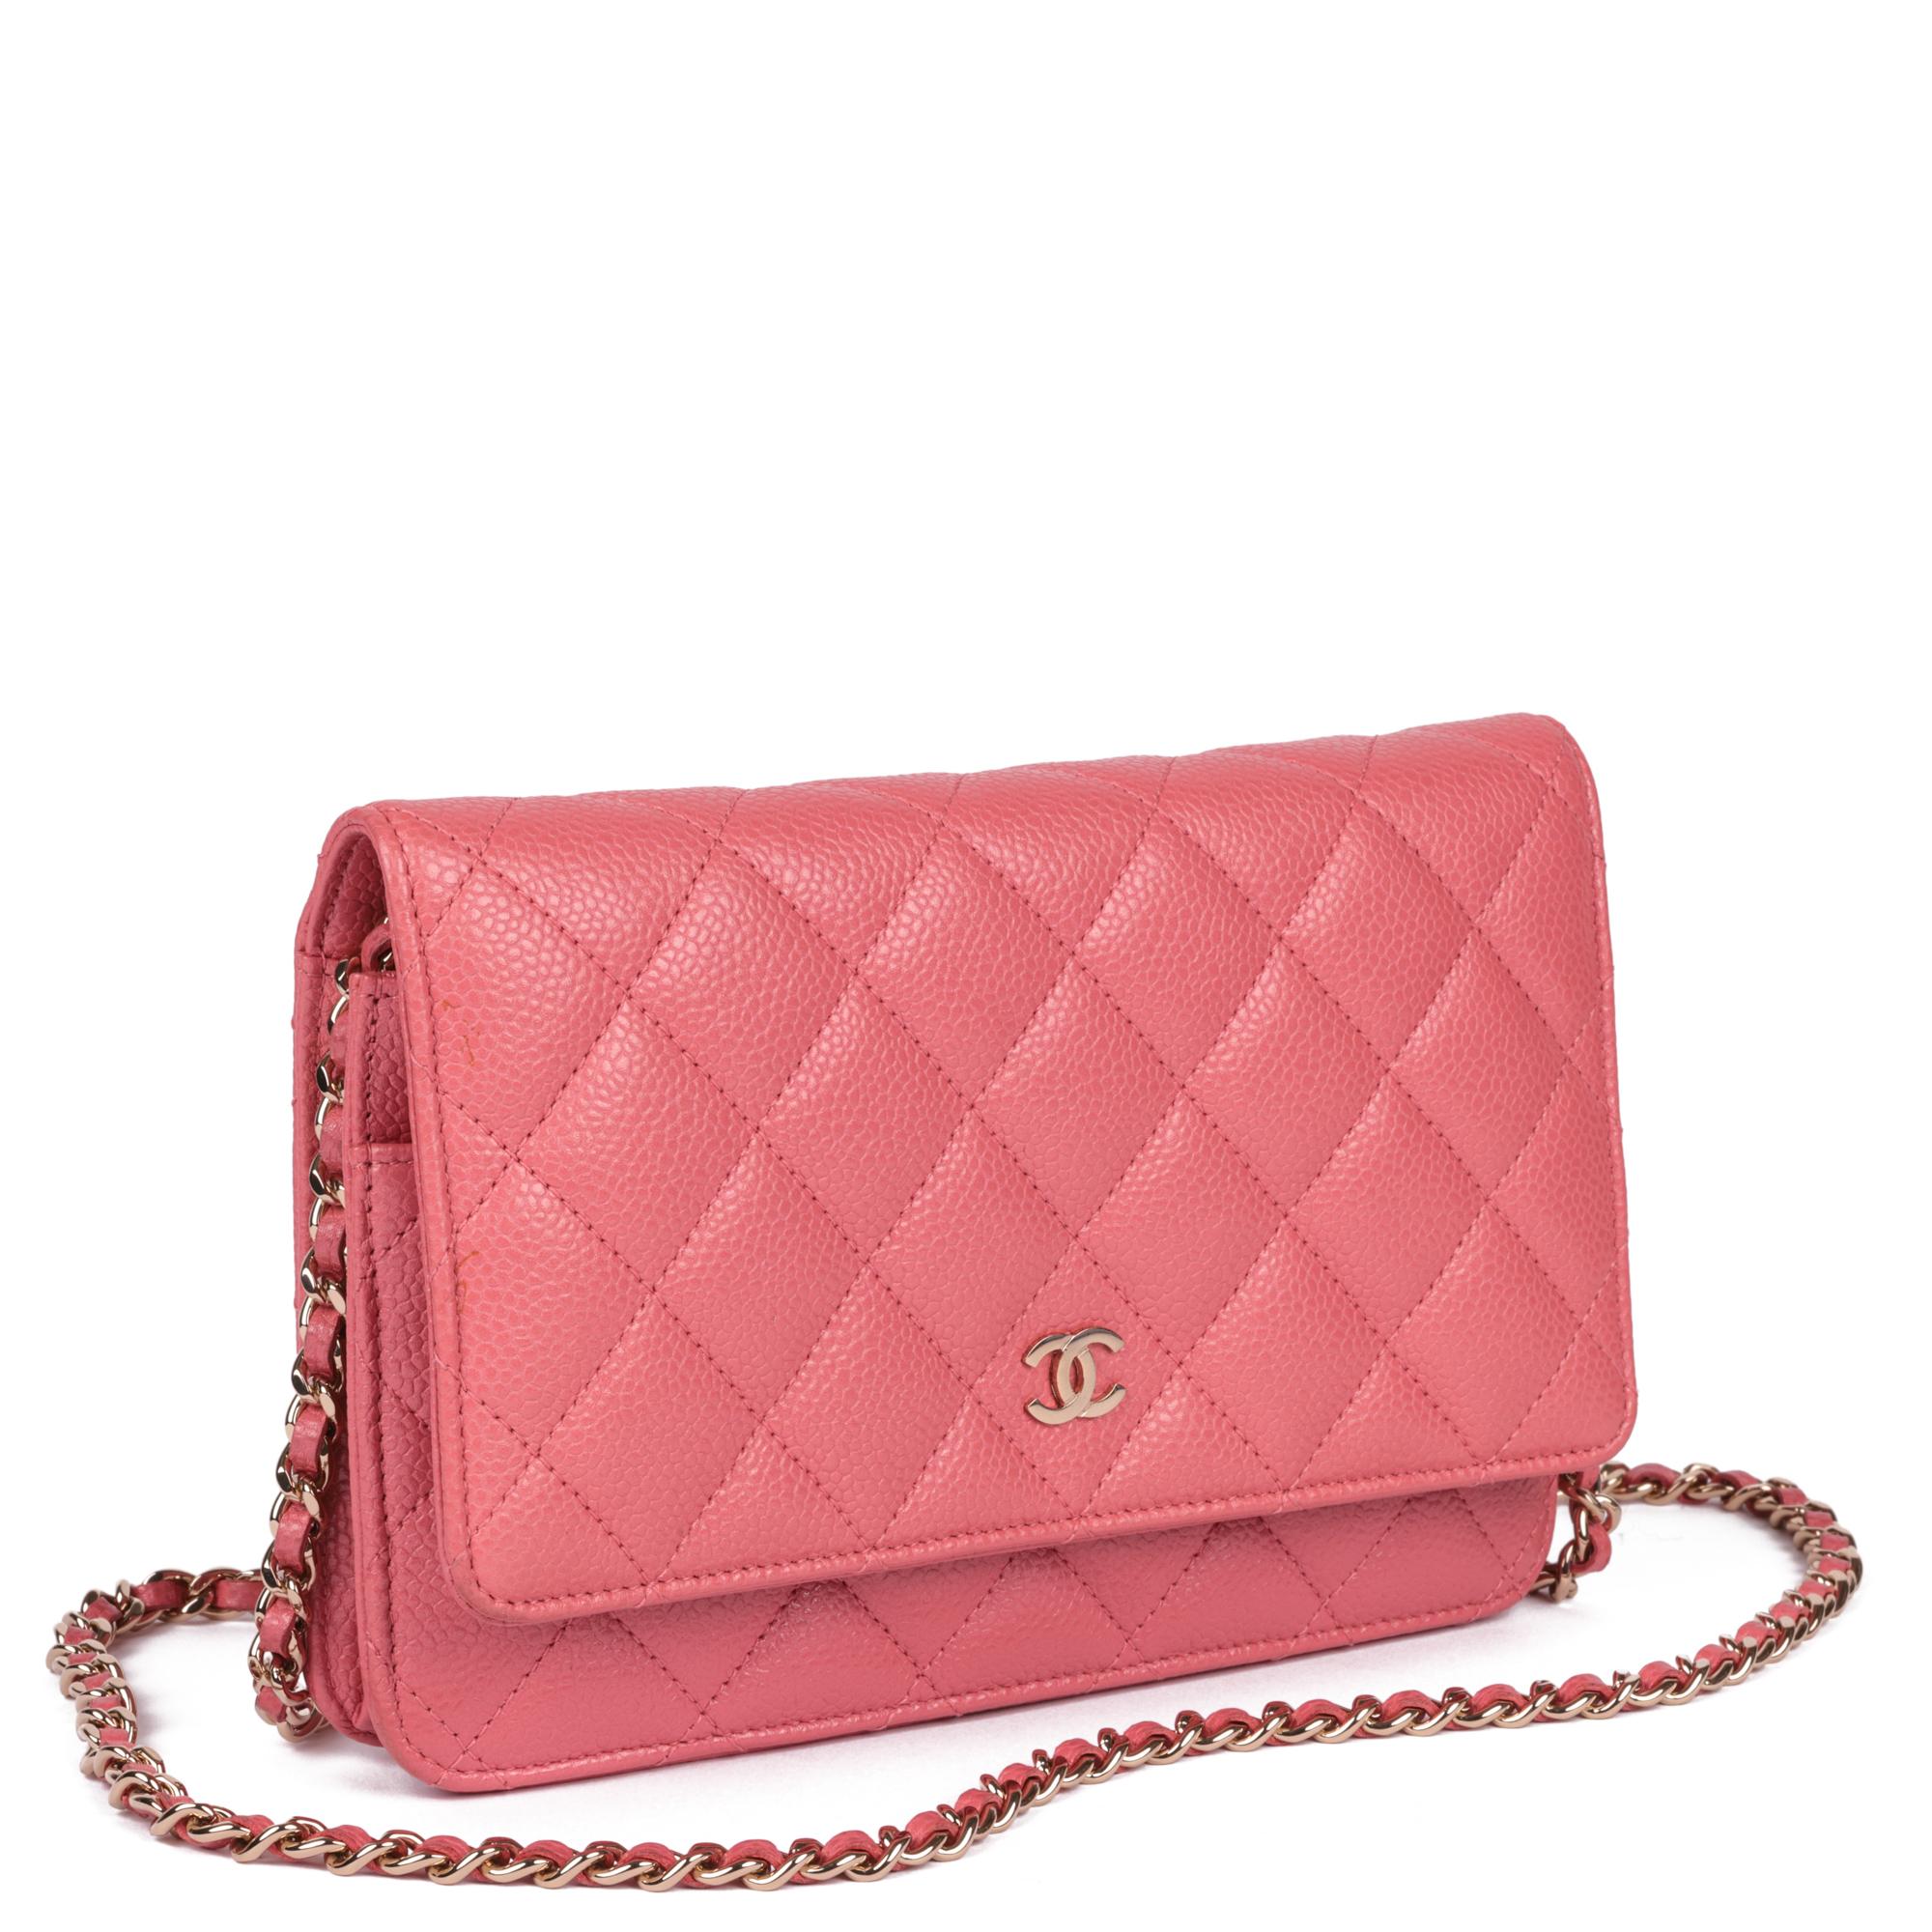 CHANEL
Pink Quilted Caviar Leather Wallet-on-Chain WOC

Serial Number: 25524442
Age (Circa): 2018
Accompanied By: Chanel Dust Bag, Box, Authenticity Card, Care Booklet, Protective Felt
Authenticity Details:  Authenticity Card, Serial Sticker (Made